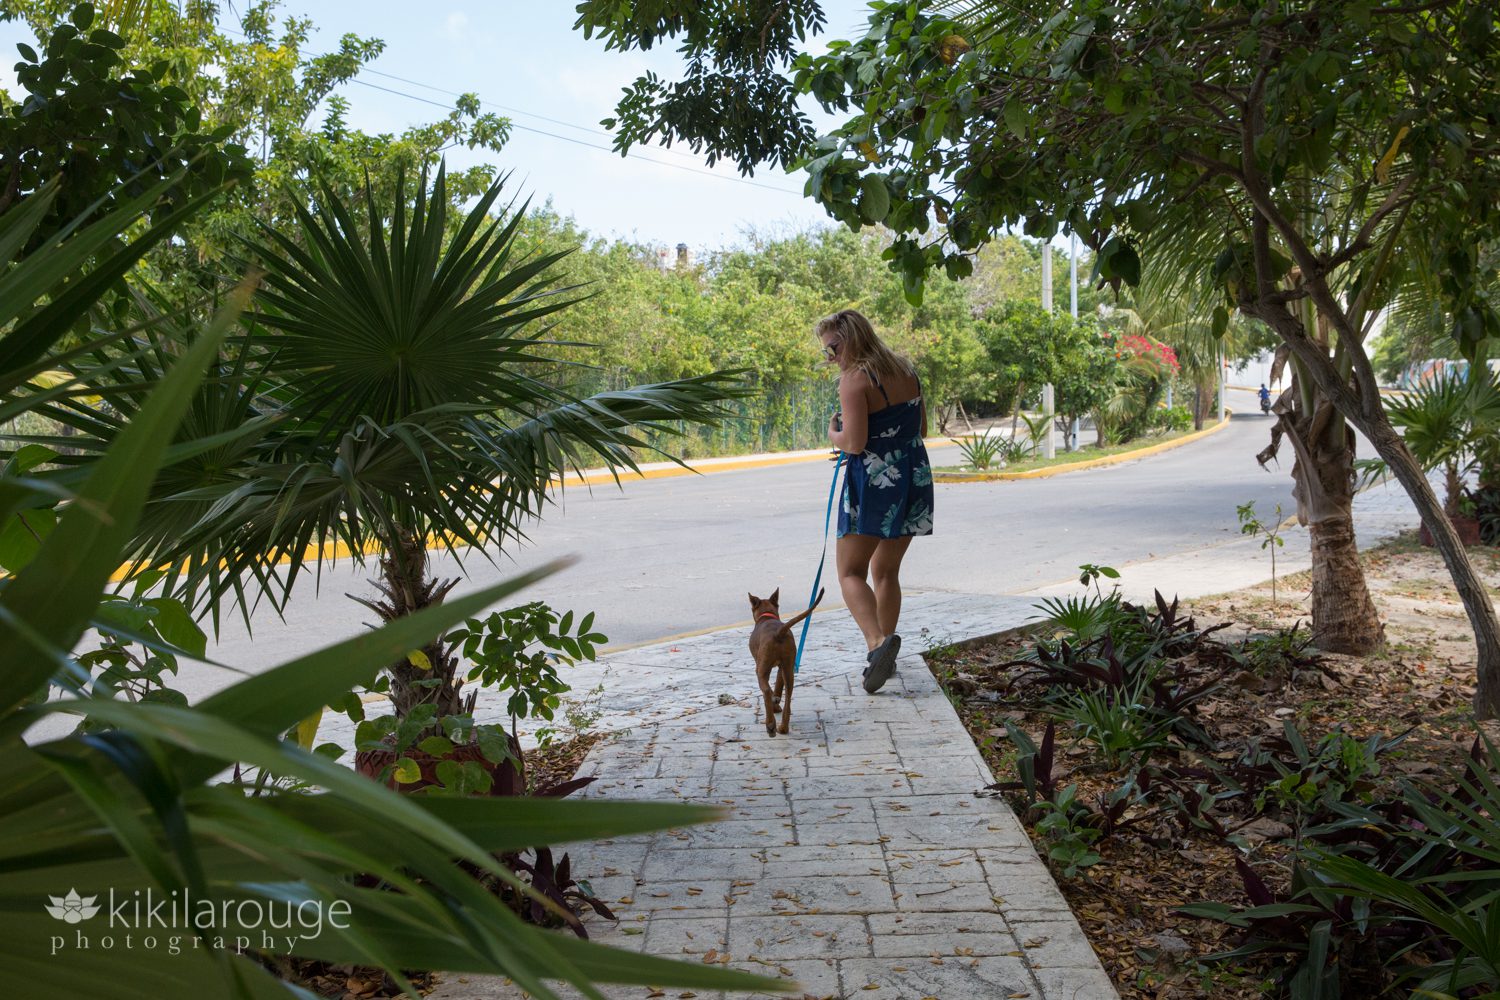 Woman in blue dress walking small rescue dog in tropical setting